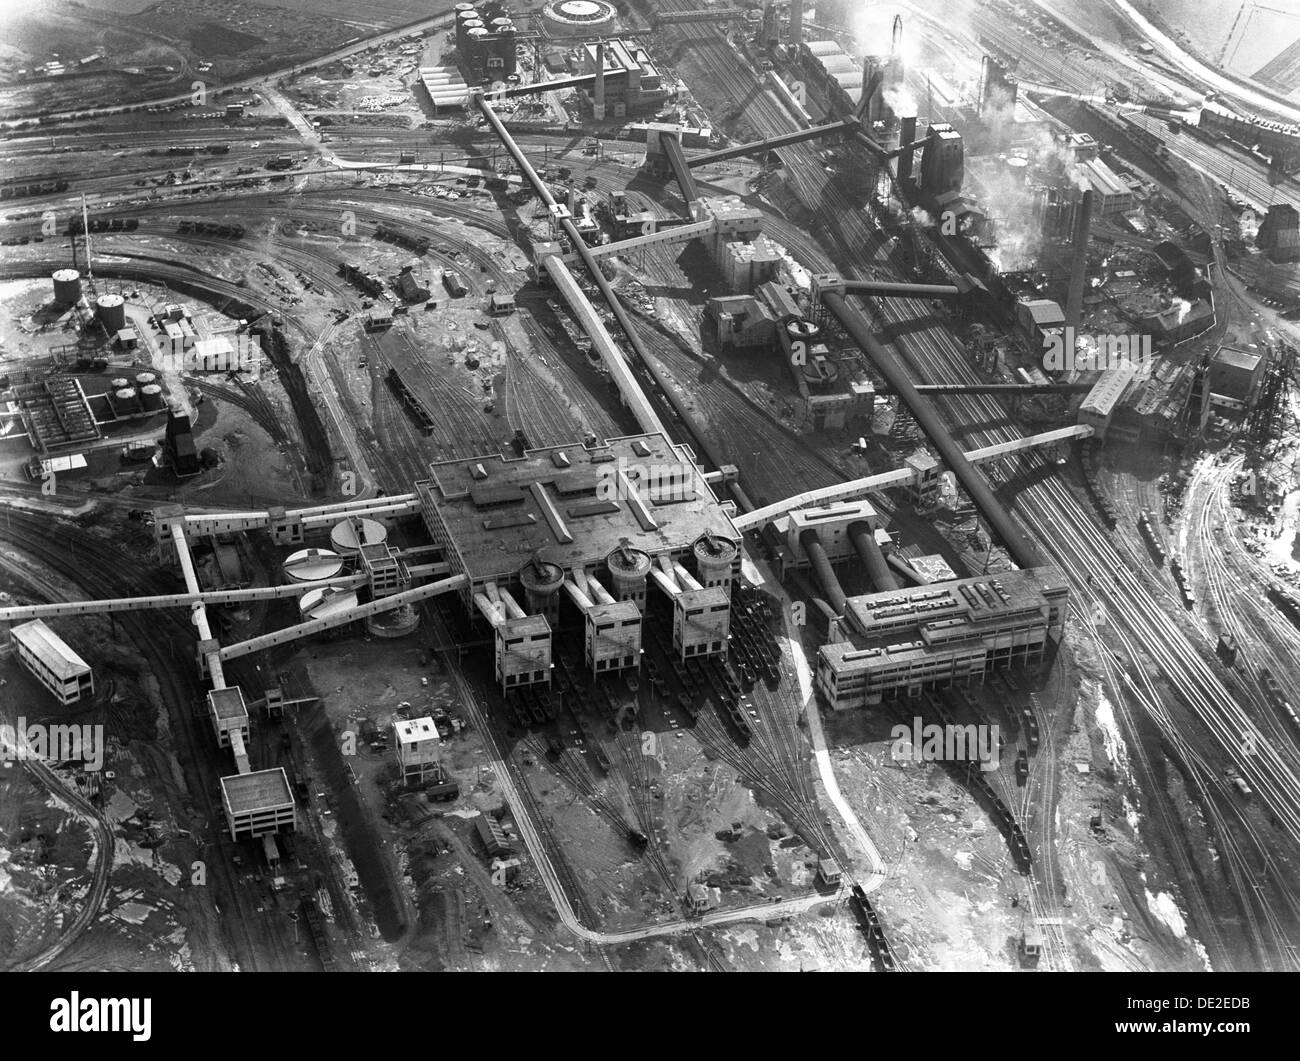 Aerial view of the Manvers coal processing plant, Wath upon Dearne, South Yorkshire, 1964. Artist: Michael Walters Stock Photo